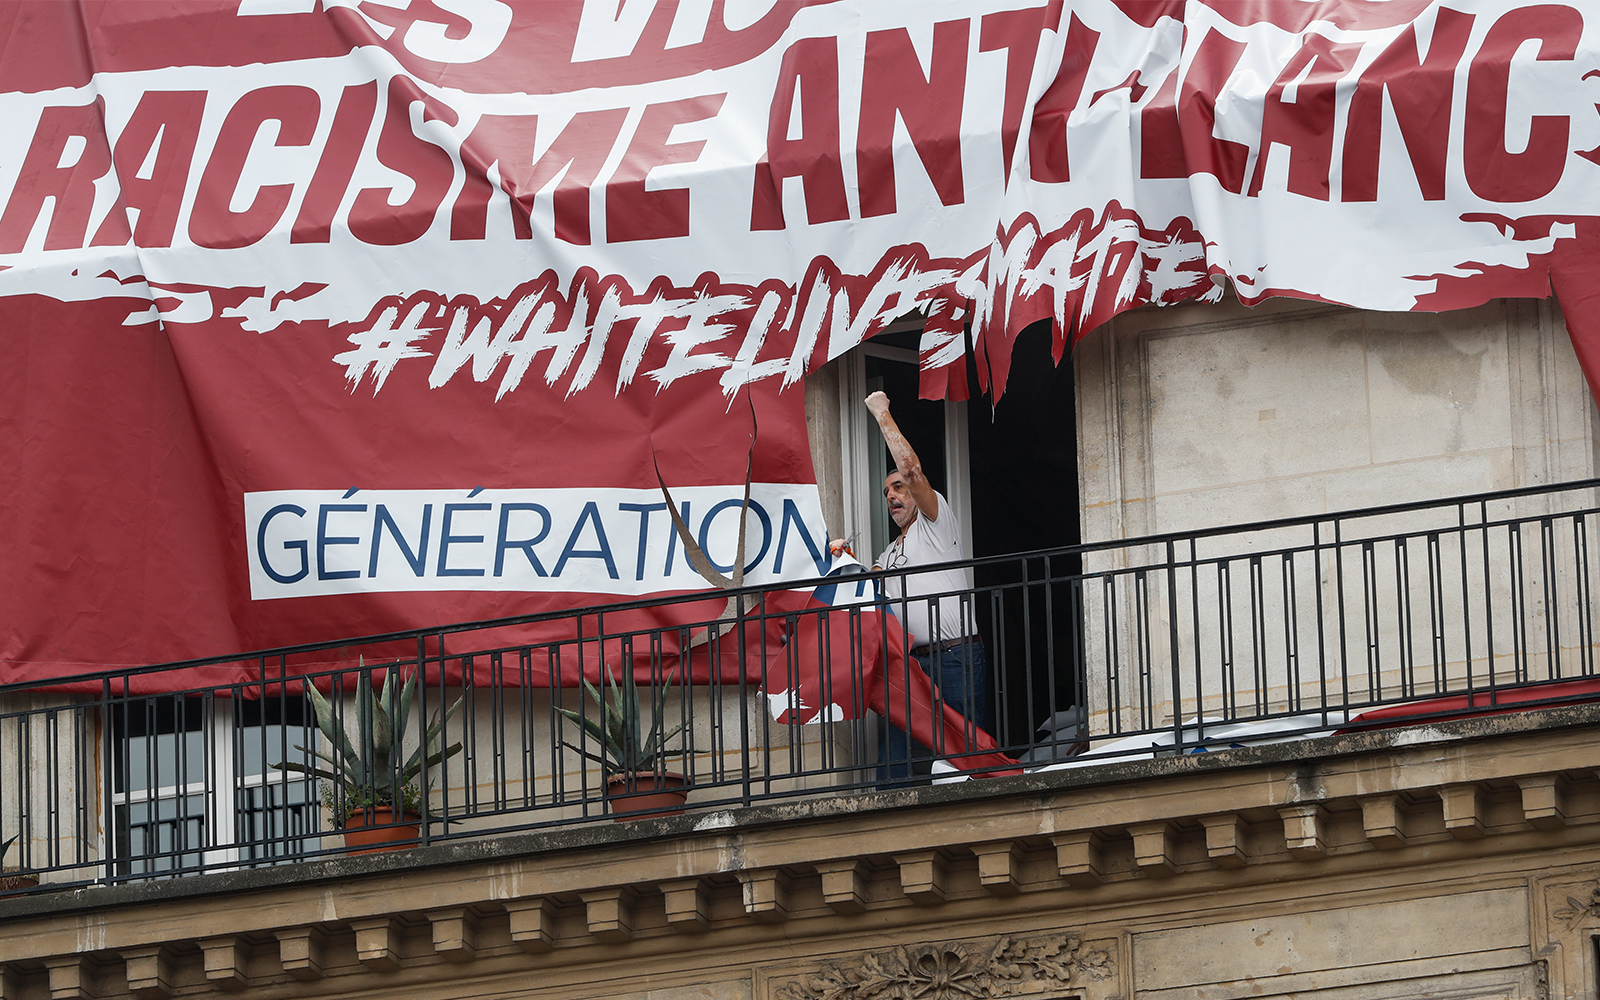 A Paris resident clenches his fist after cutting up a banner with was lowered from the roof of his building by far-right protestors, June 13, 2020. (AP/Thibault Camus)